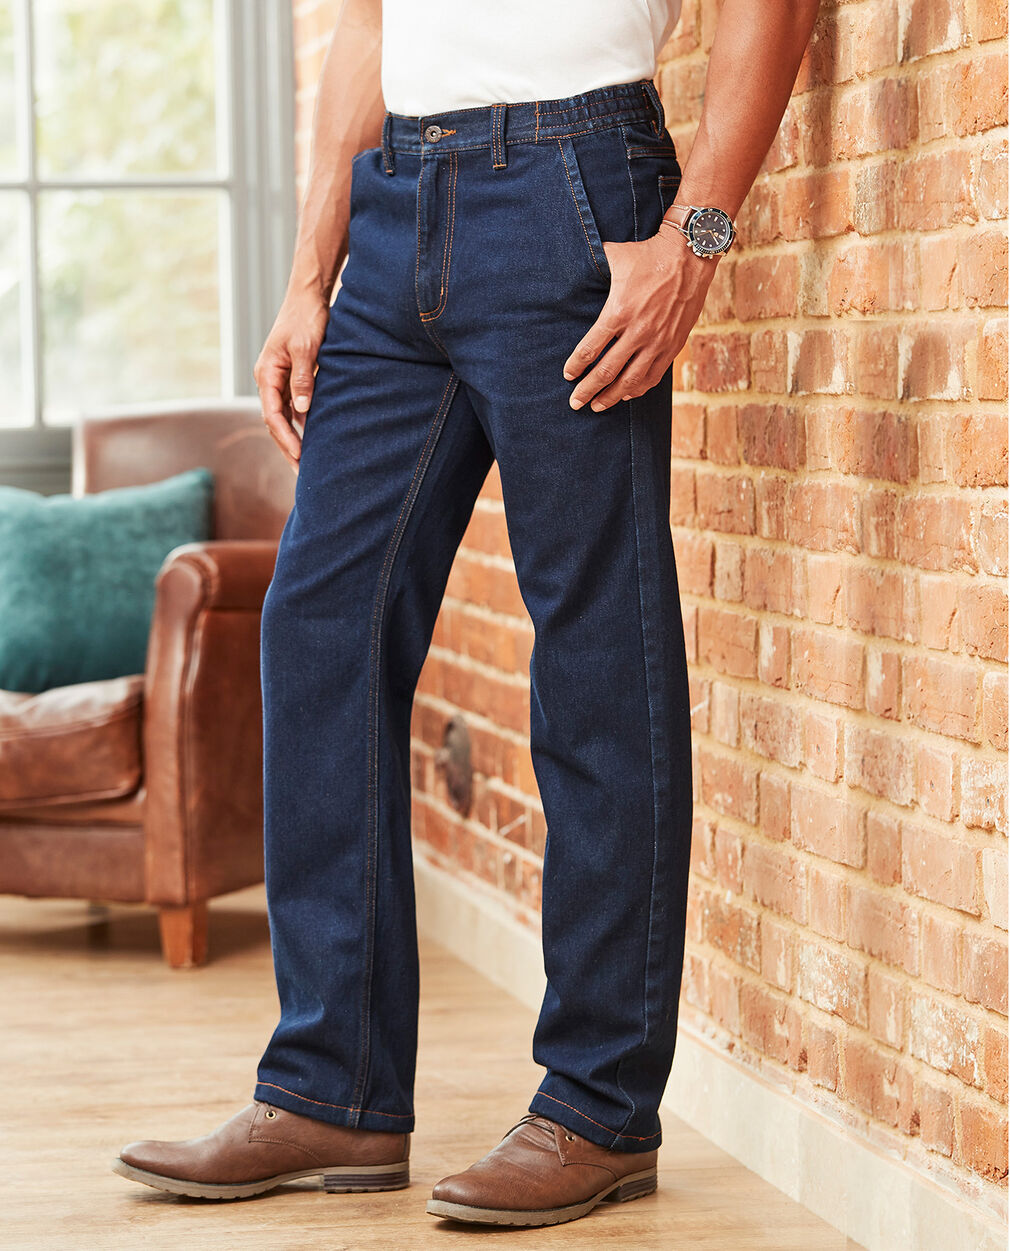 Man wearing a pair of dark blue wash denim jeans with a white T-shirt tucked in and brown shoes. The background is of a brick wall